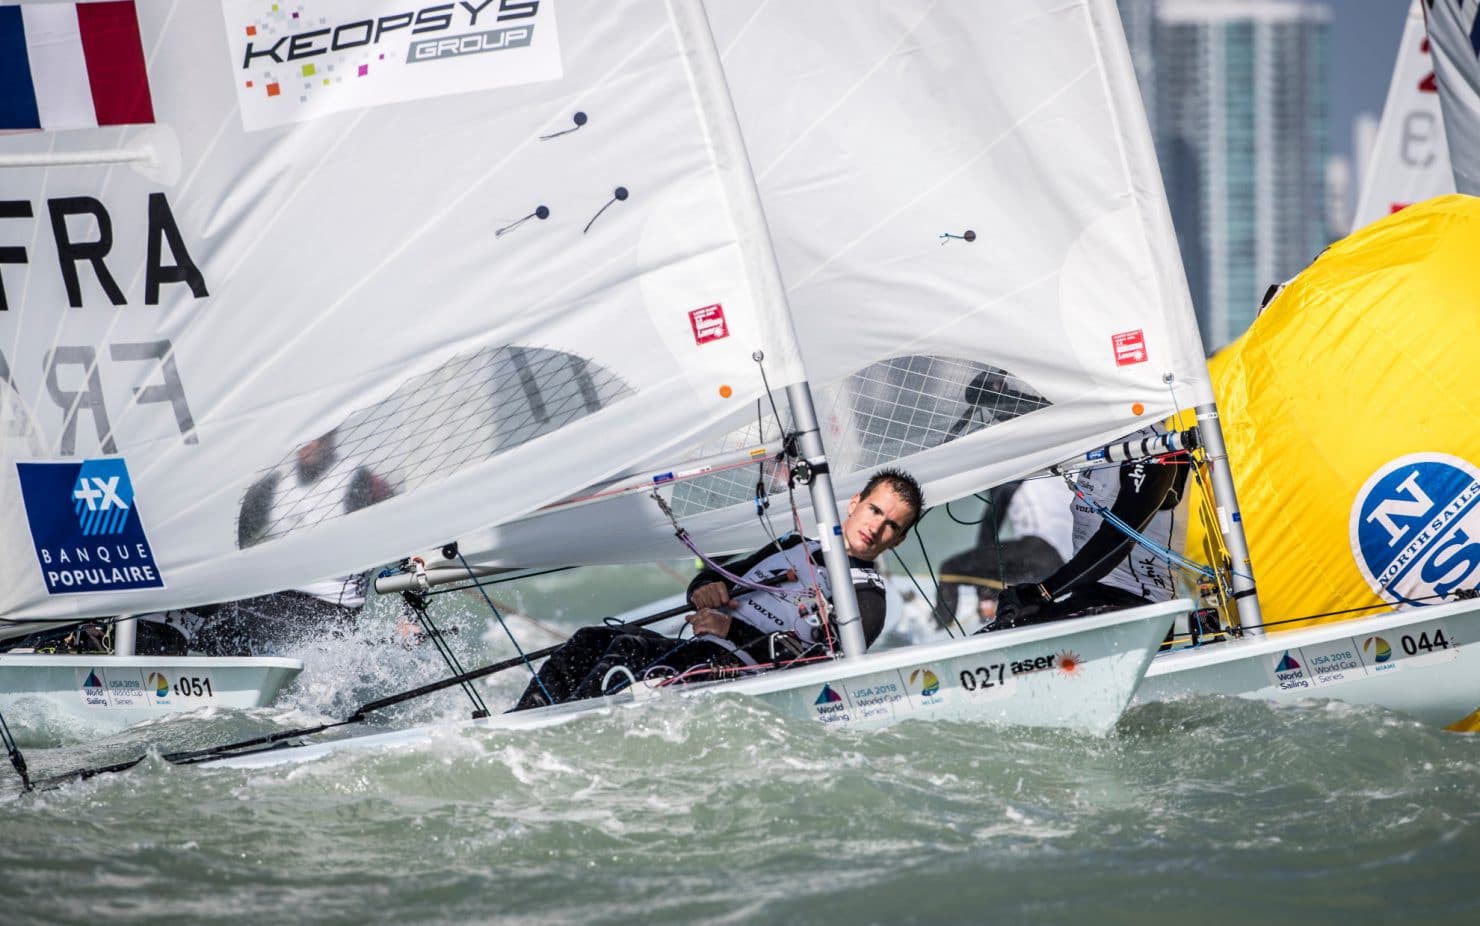 27 FRA 213607 Loïc Queyroux (M) Laser, Classes, Laser, Olympic Sailing, Sailing Energy, World Cup Series Miami, World Sailing